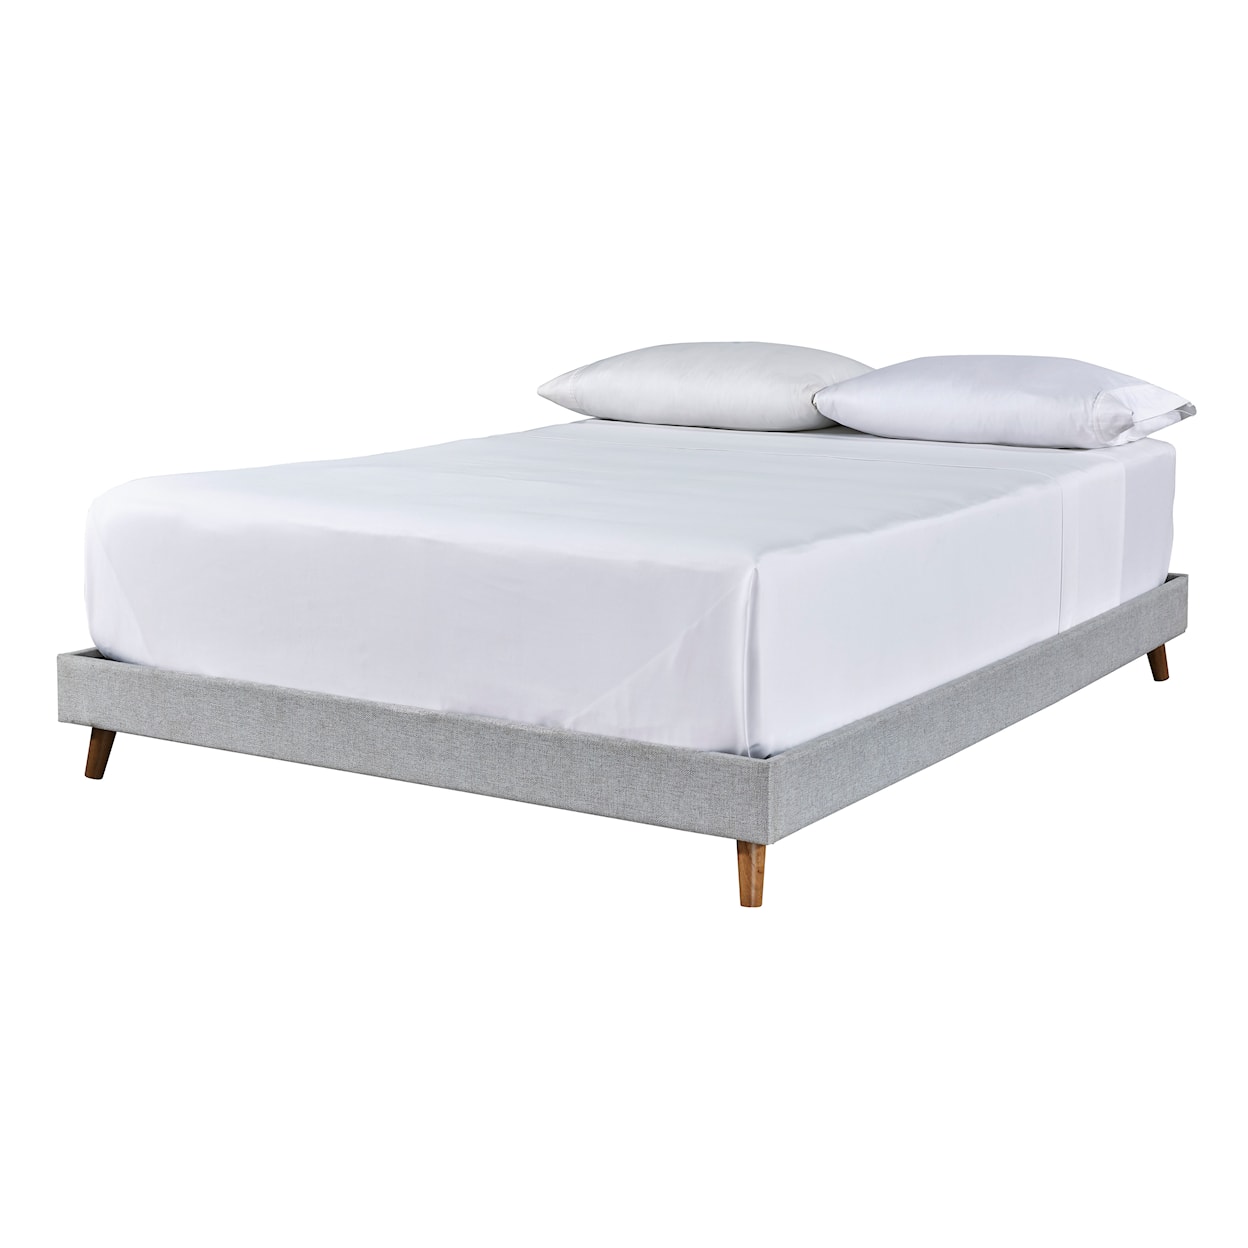 Signature Design by Ashley Tannally Queen Upholstered Platform Bed